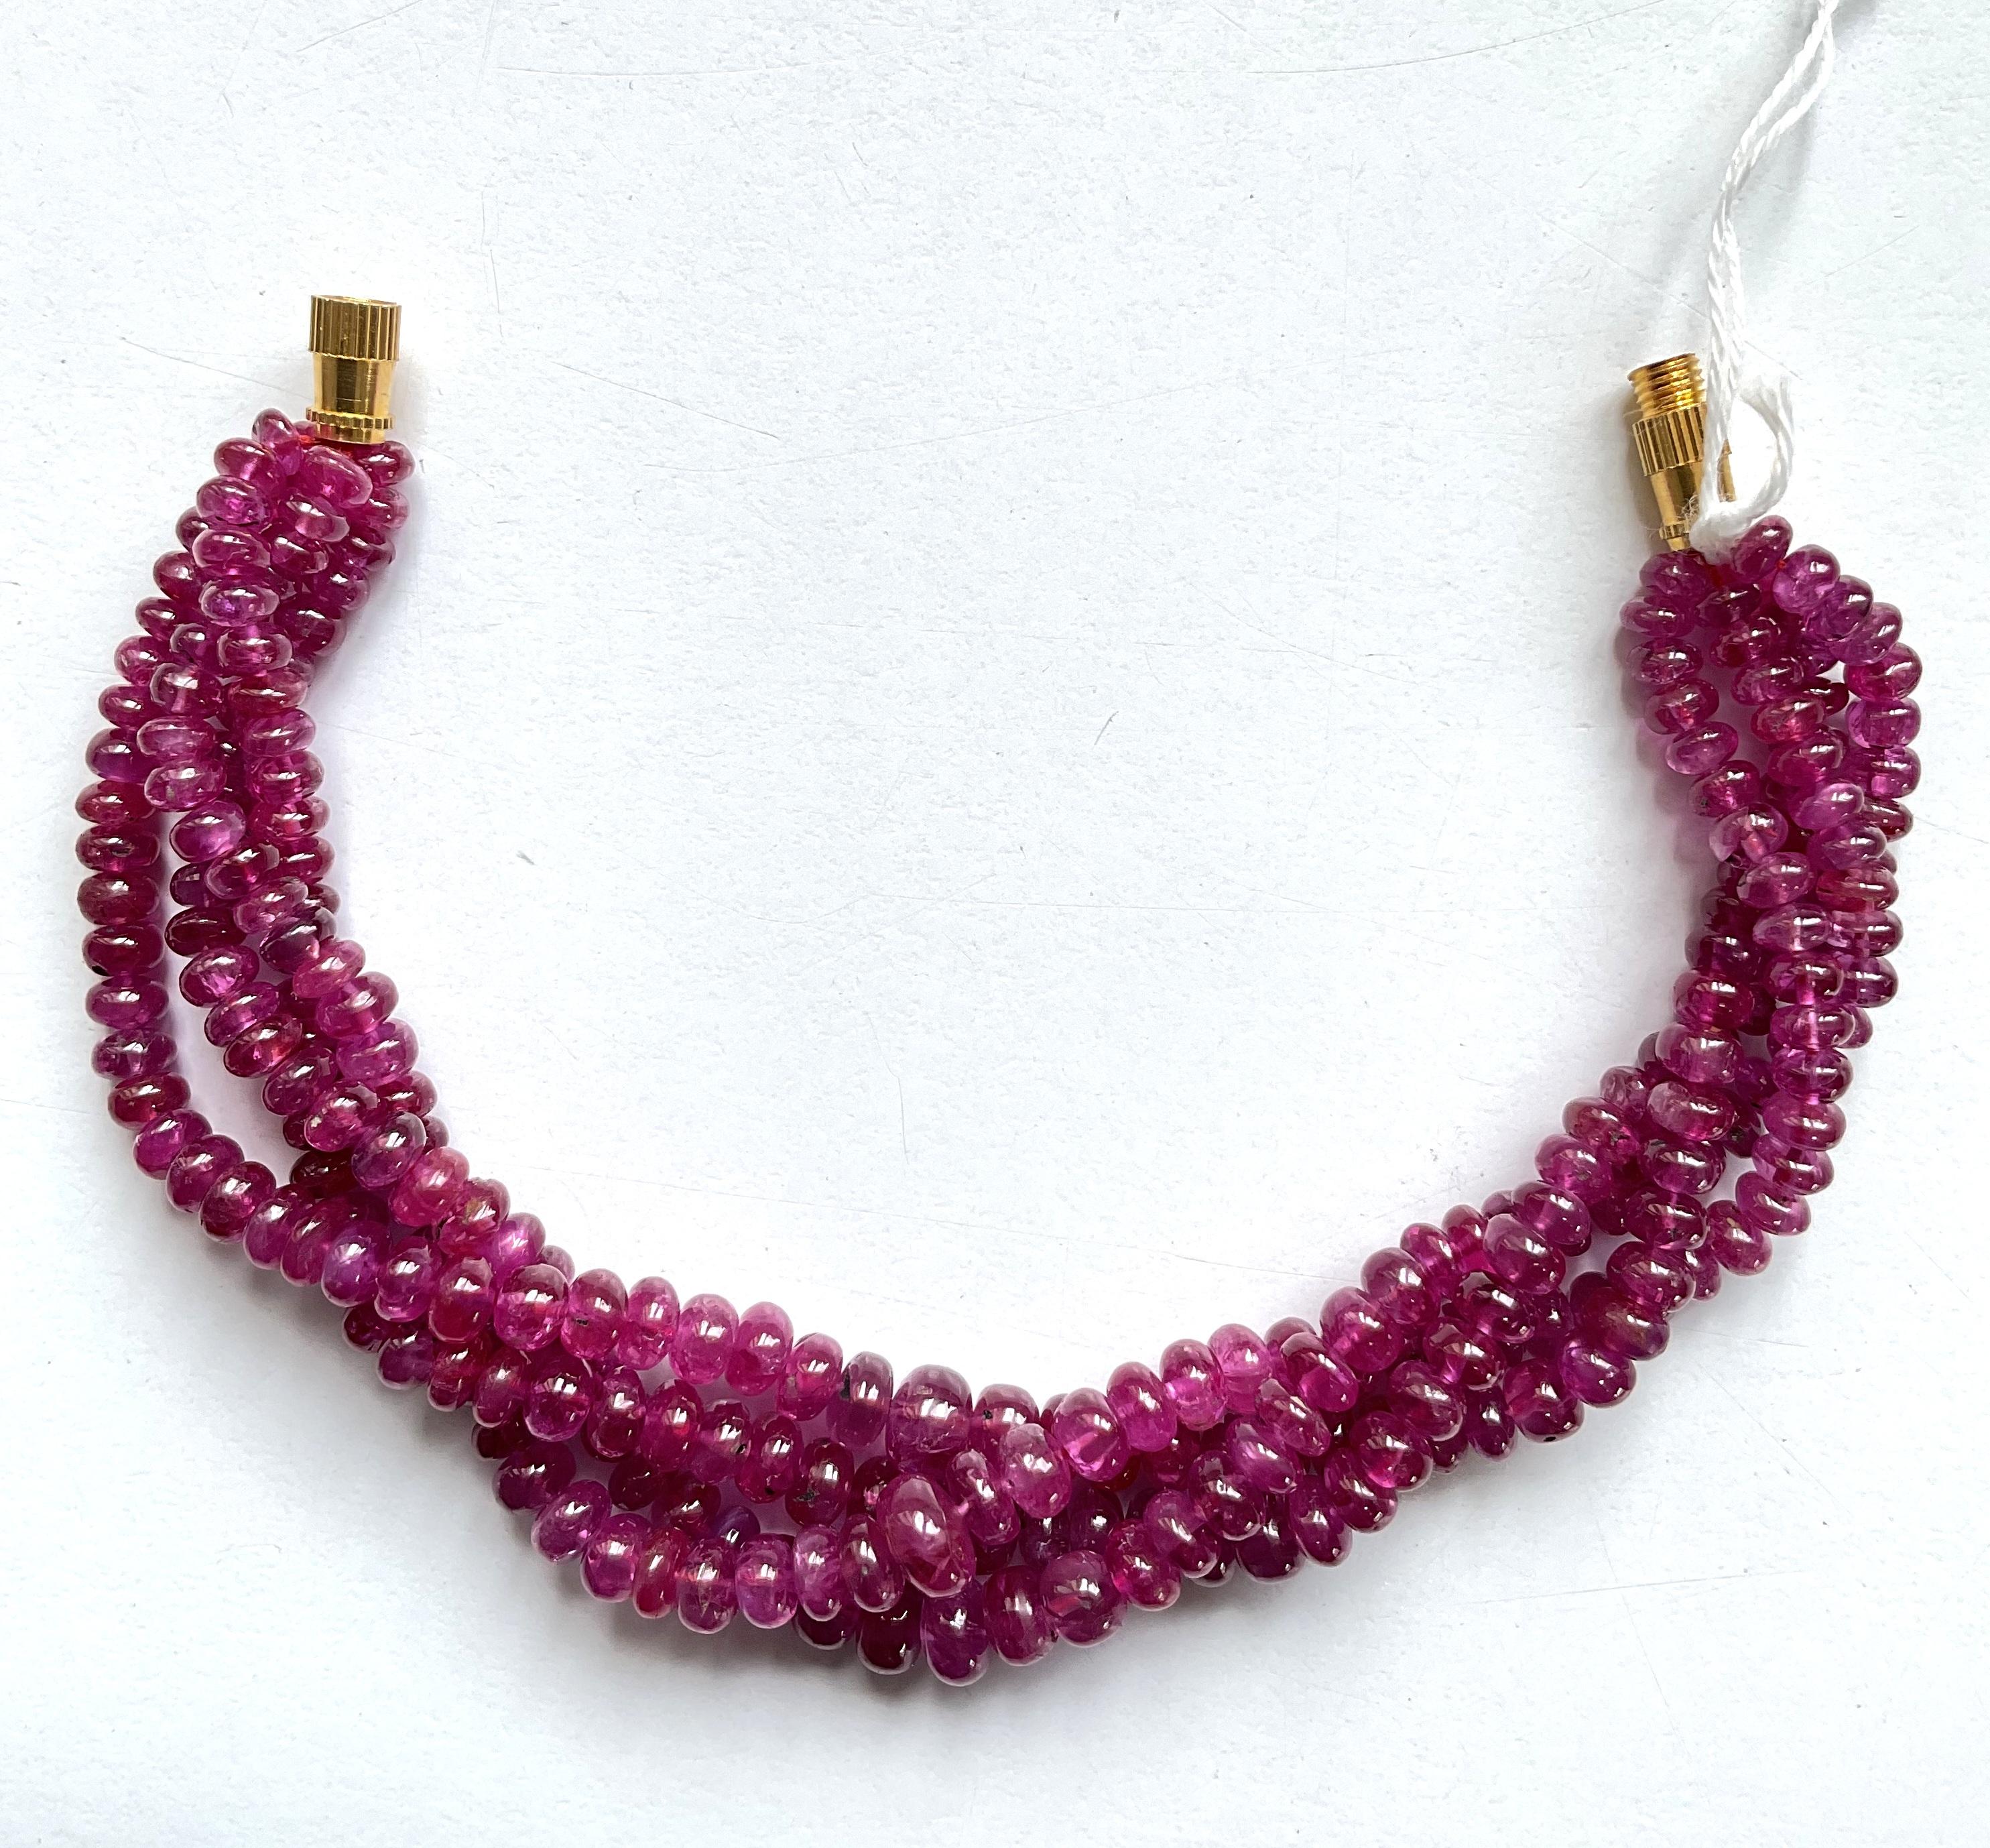 132.80 Carats Burma Ruby Beads Plain Top Quality For Fine Jewelry Natural Gem For Sale 2